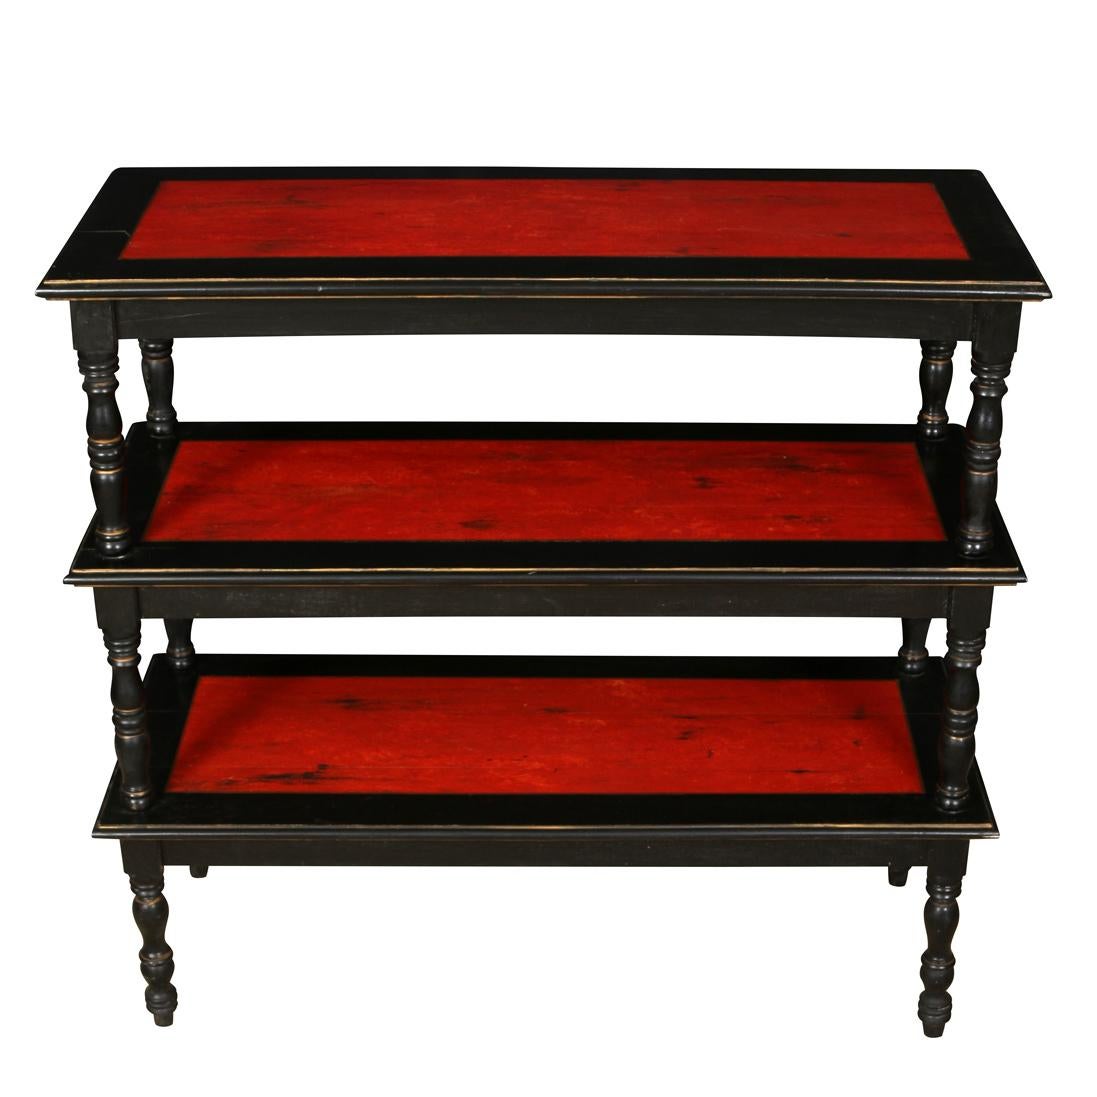 Vintage Pair of Three Tier Etageres Painted Black with Red Shelves In Good Condition For Sale In Locust Valley, NY